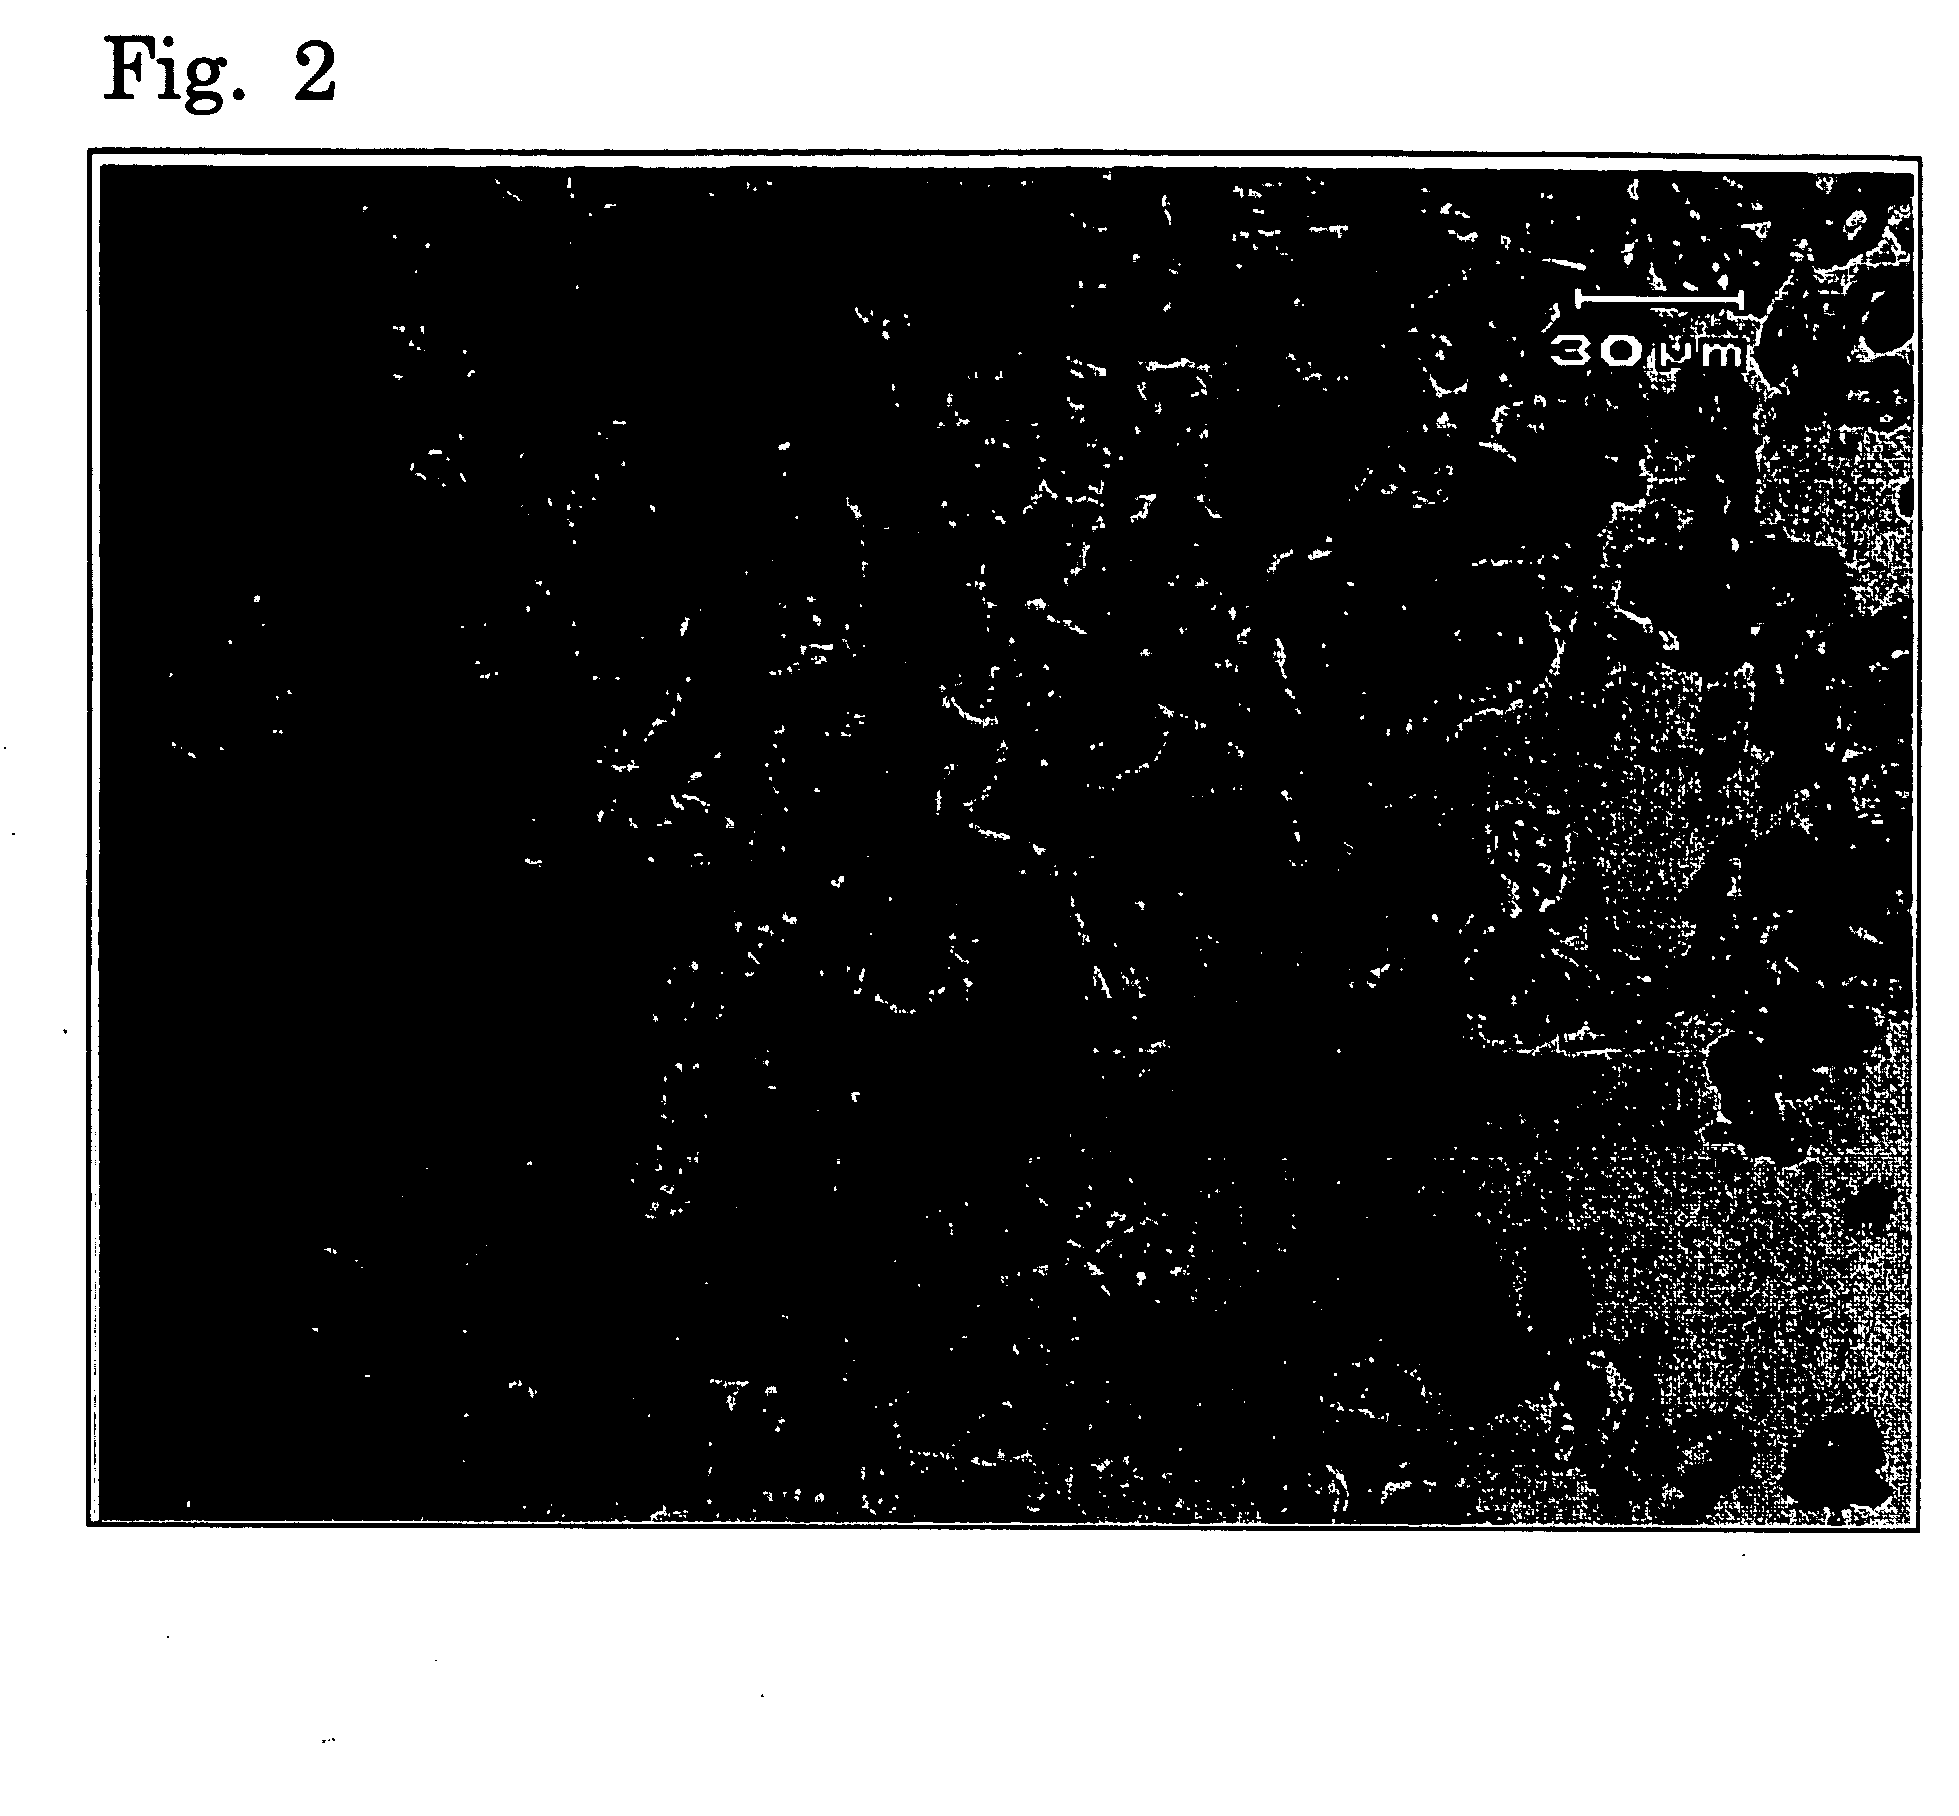 Crystals of non-natural-type stereoisomer salt of monatin and use thereof